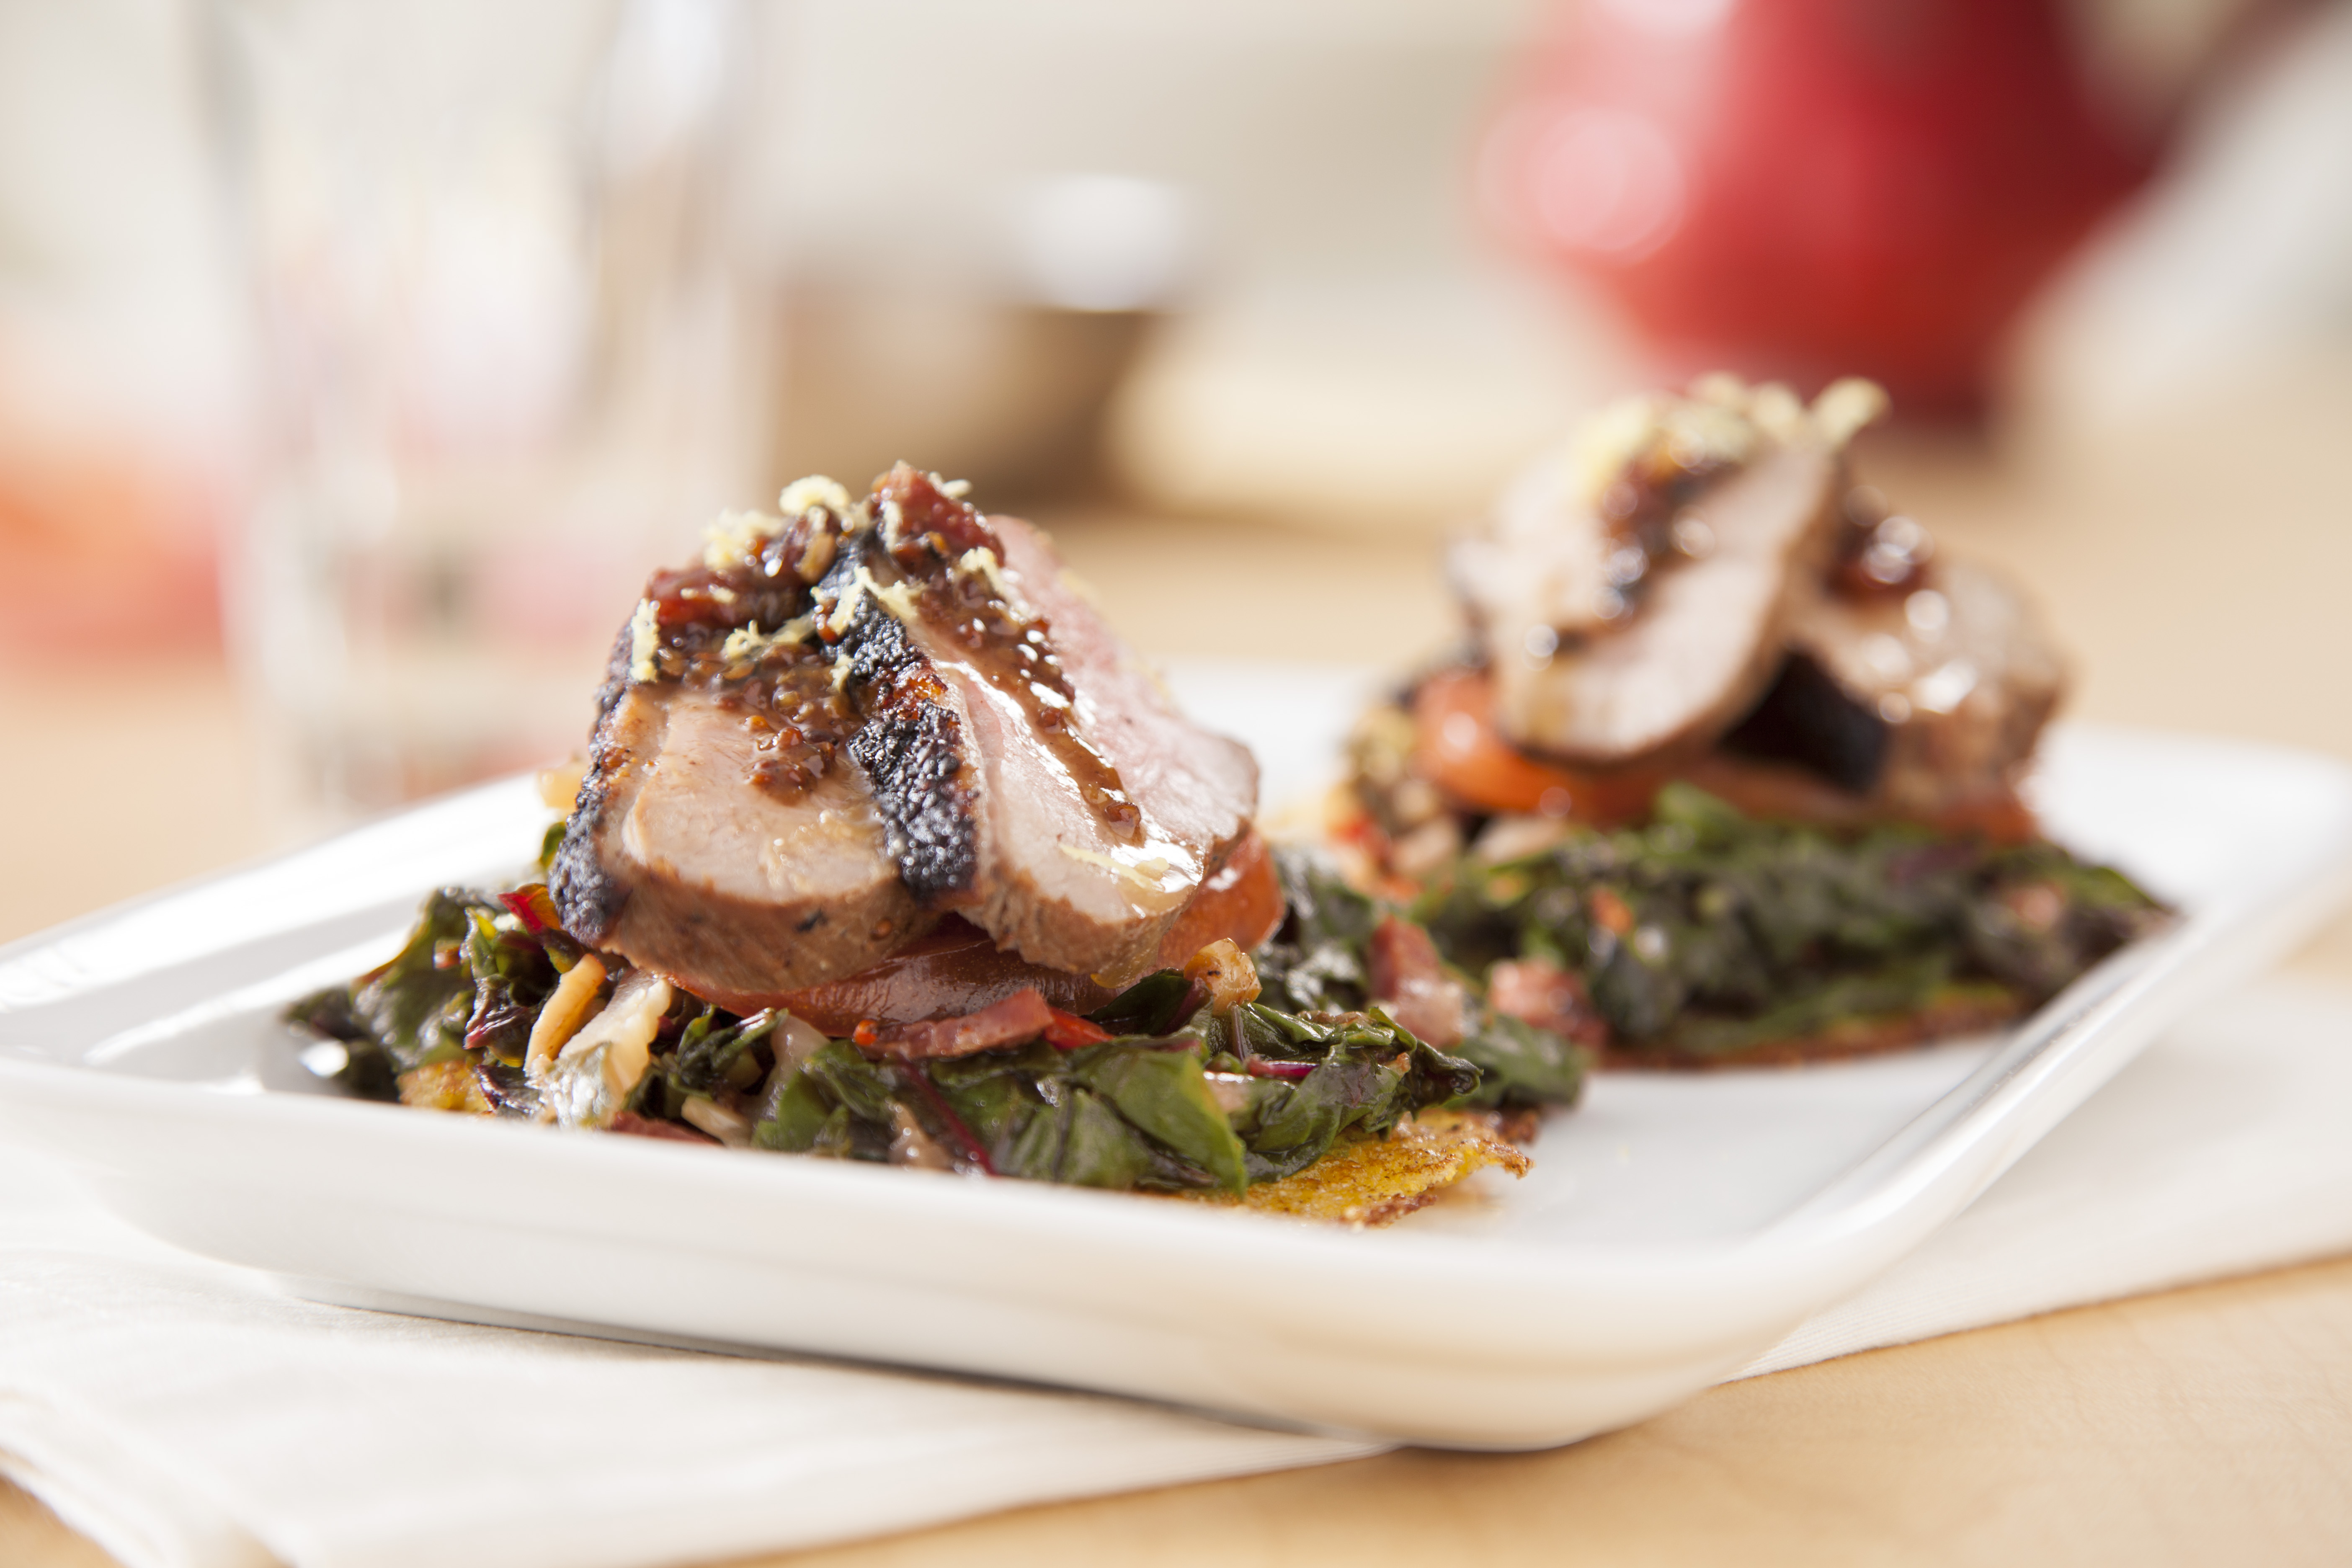 1st Runner-Up: Creole Duck with Crispy Corn Cakes and Candied Greens by Mary Edwards, of Long Beach, Calif.